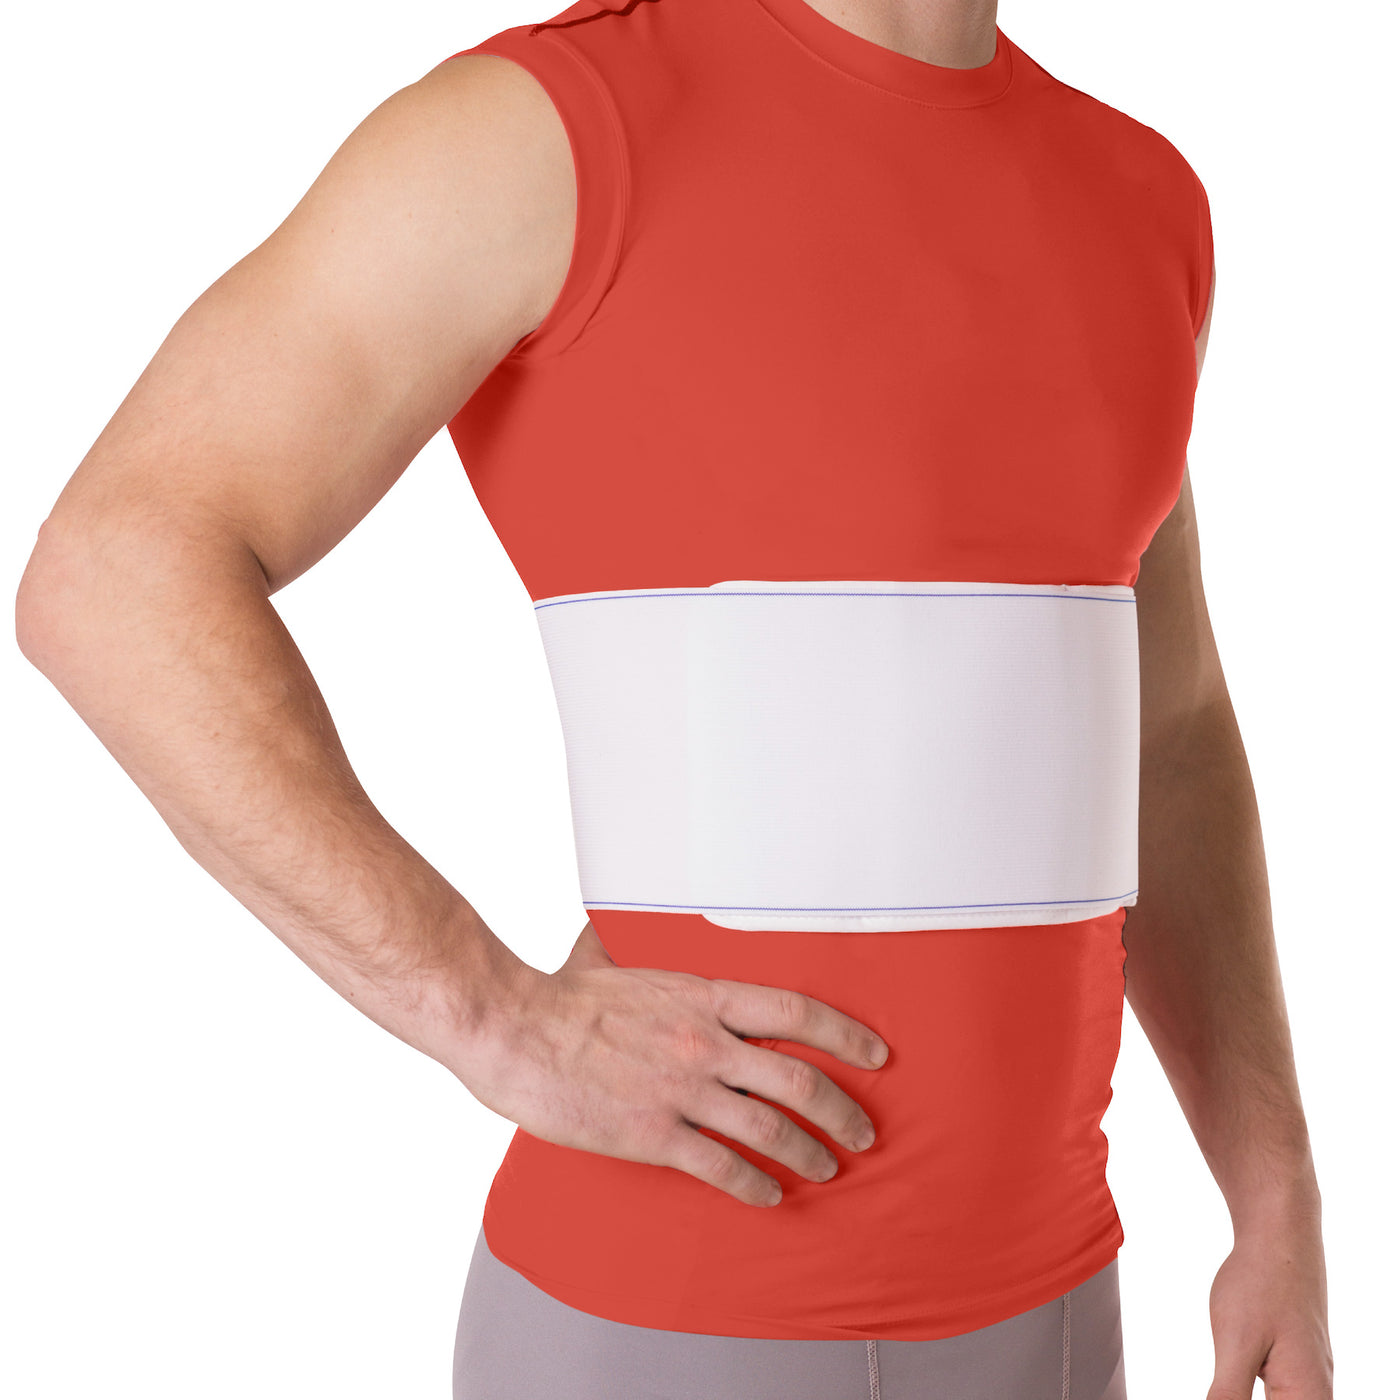 Chest Binder Rib Brace – Rib Belt to Reduce Rib Cage Pain. Chest  Compression Support for Rib Muscle Injuries, Bruised Ribs or Rib Flare.  Breathable